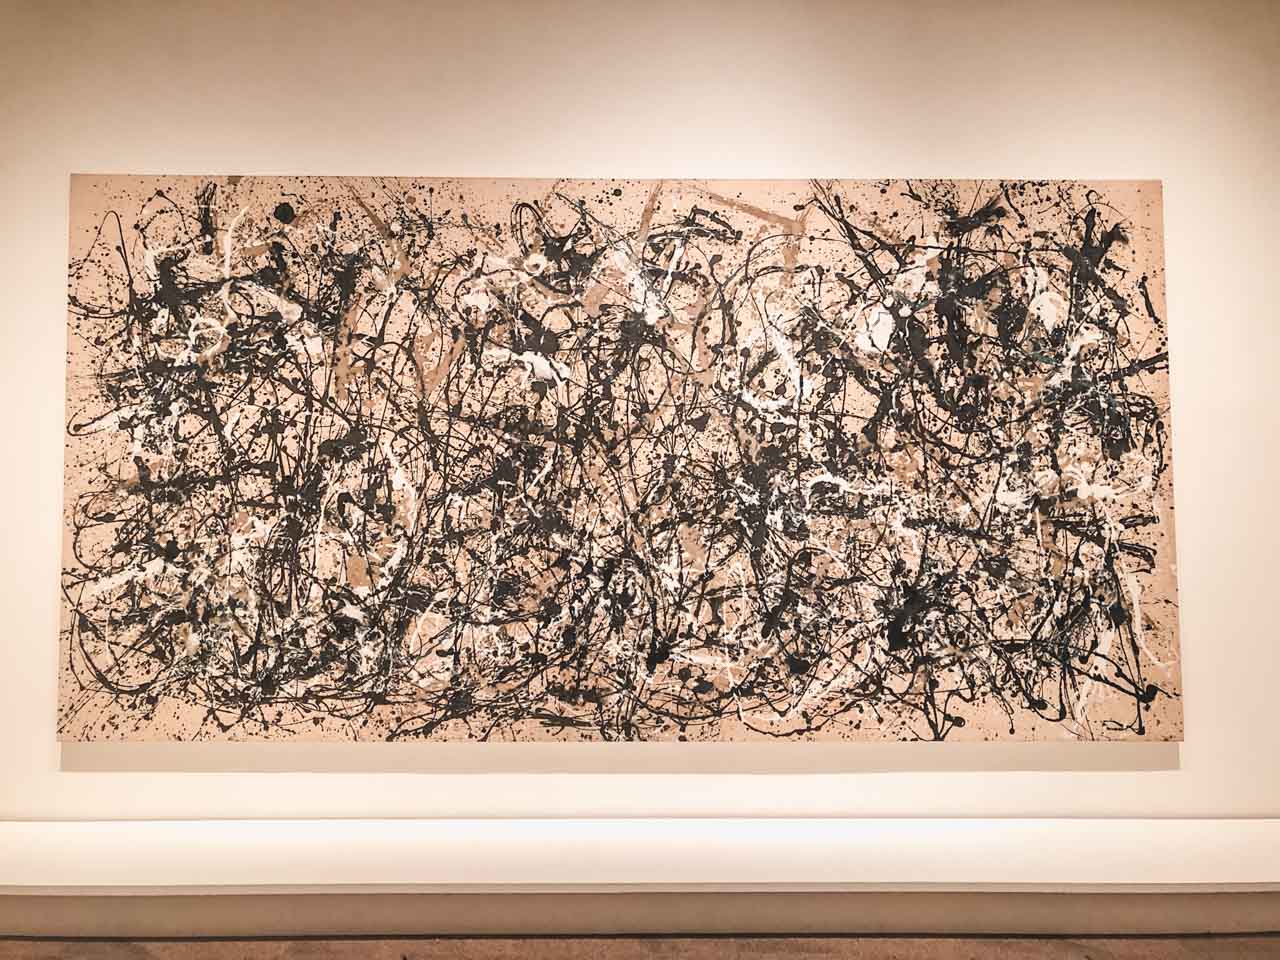 A painting of Jackson Pollock on display at The Met